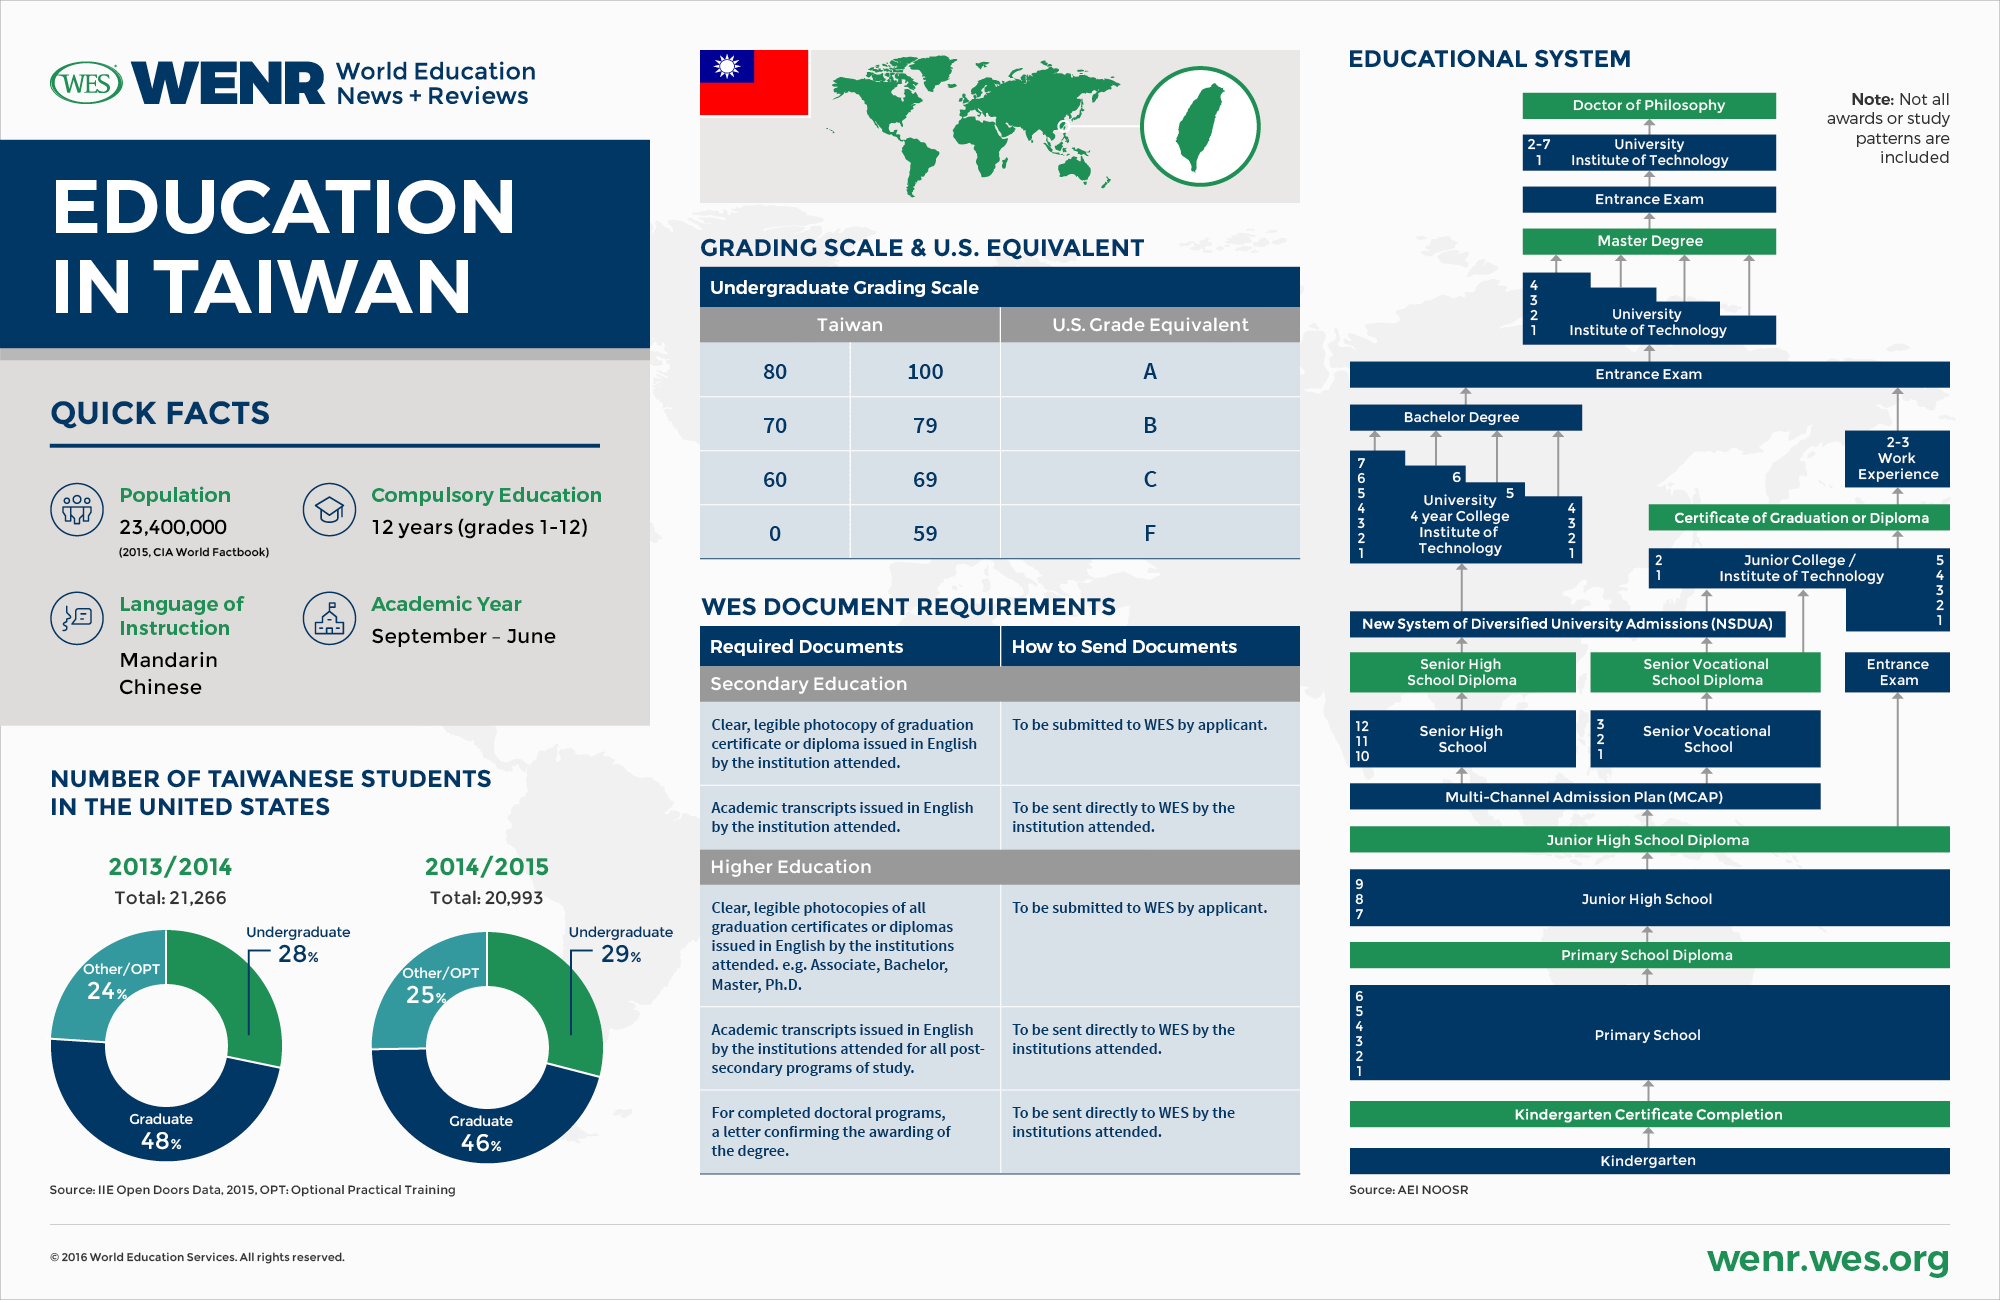 An infographic with fast facts about Taiwan's educational system and international student mobility landscape. 